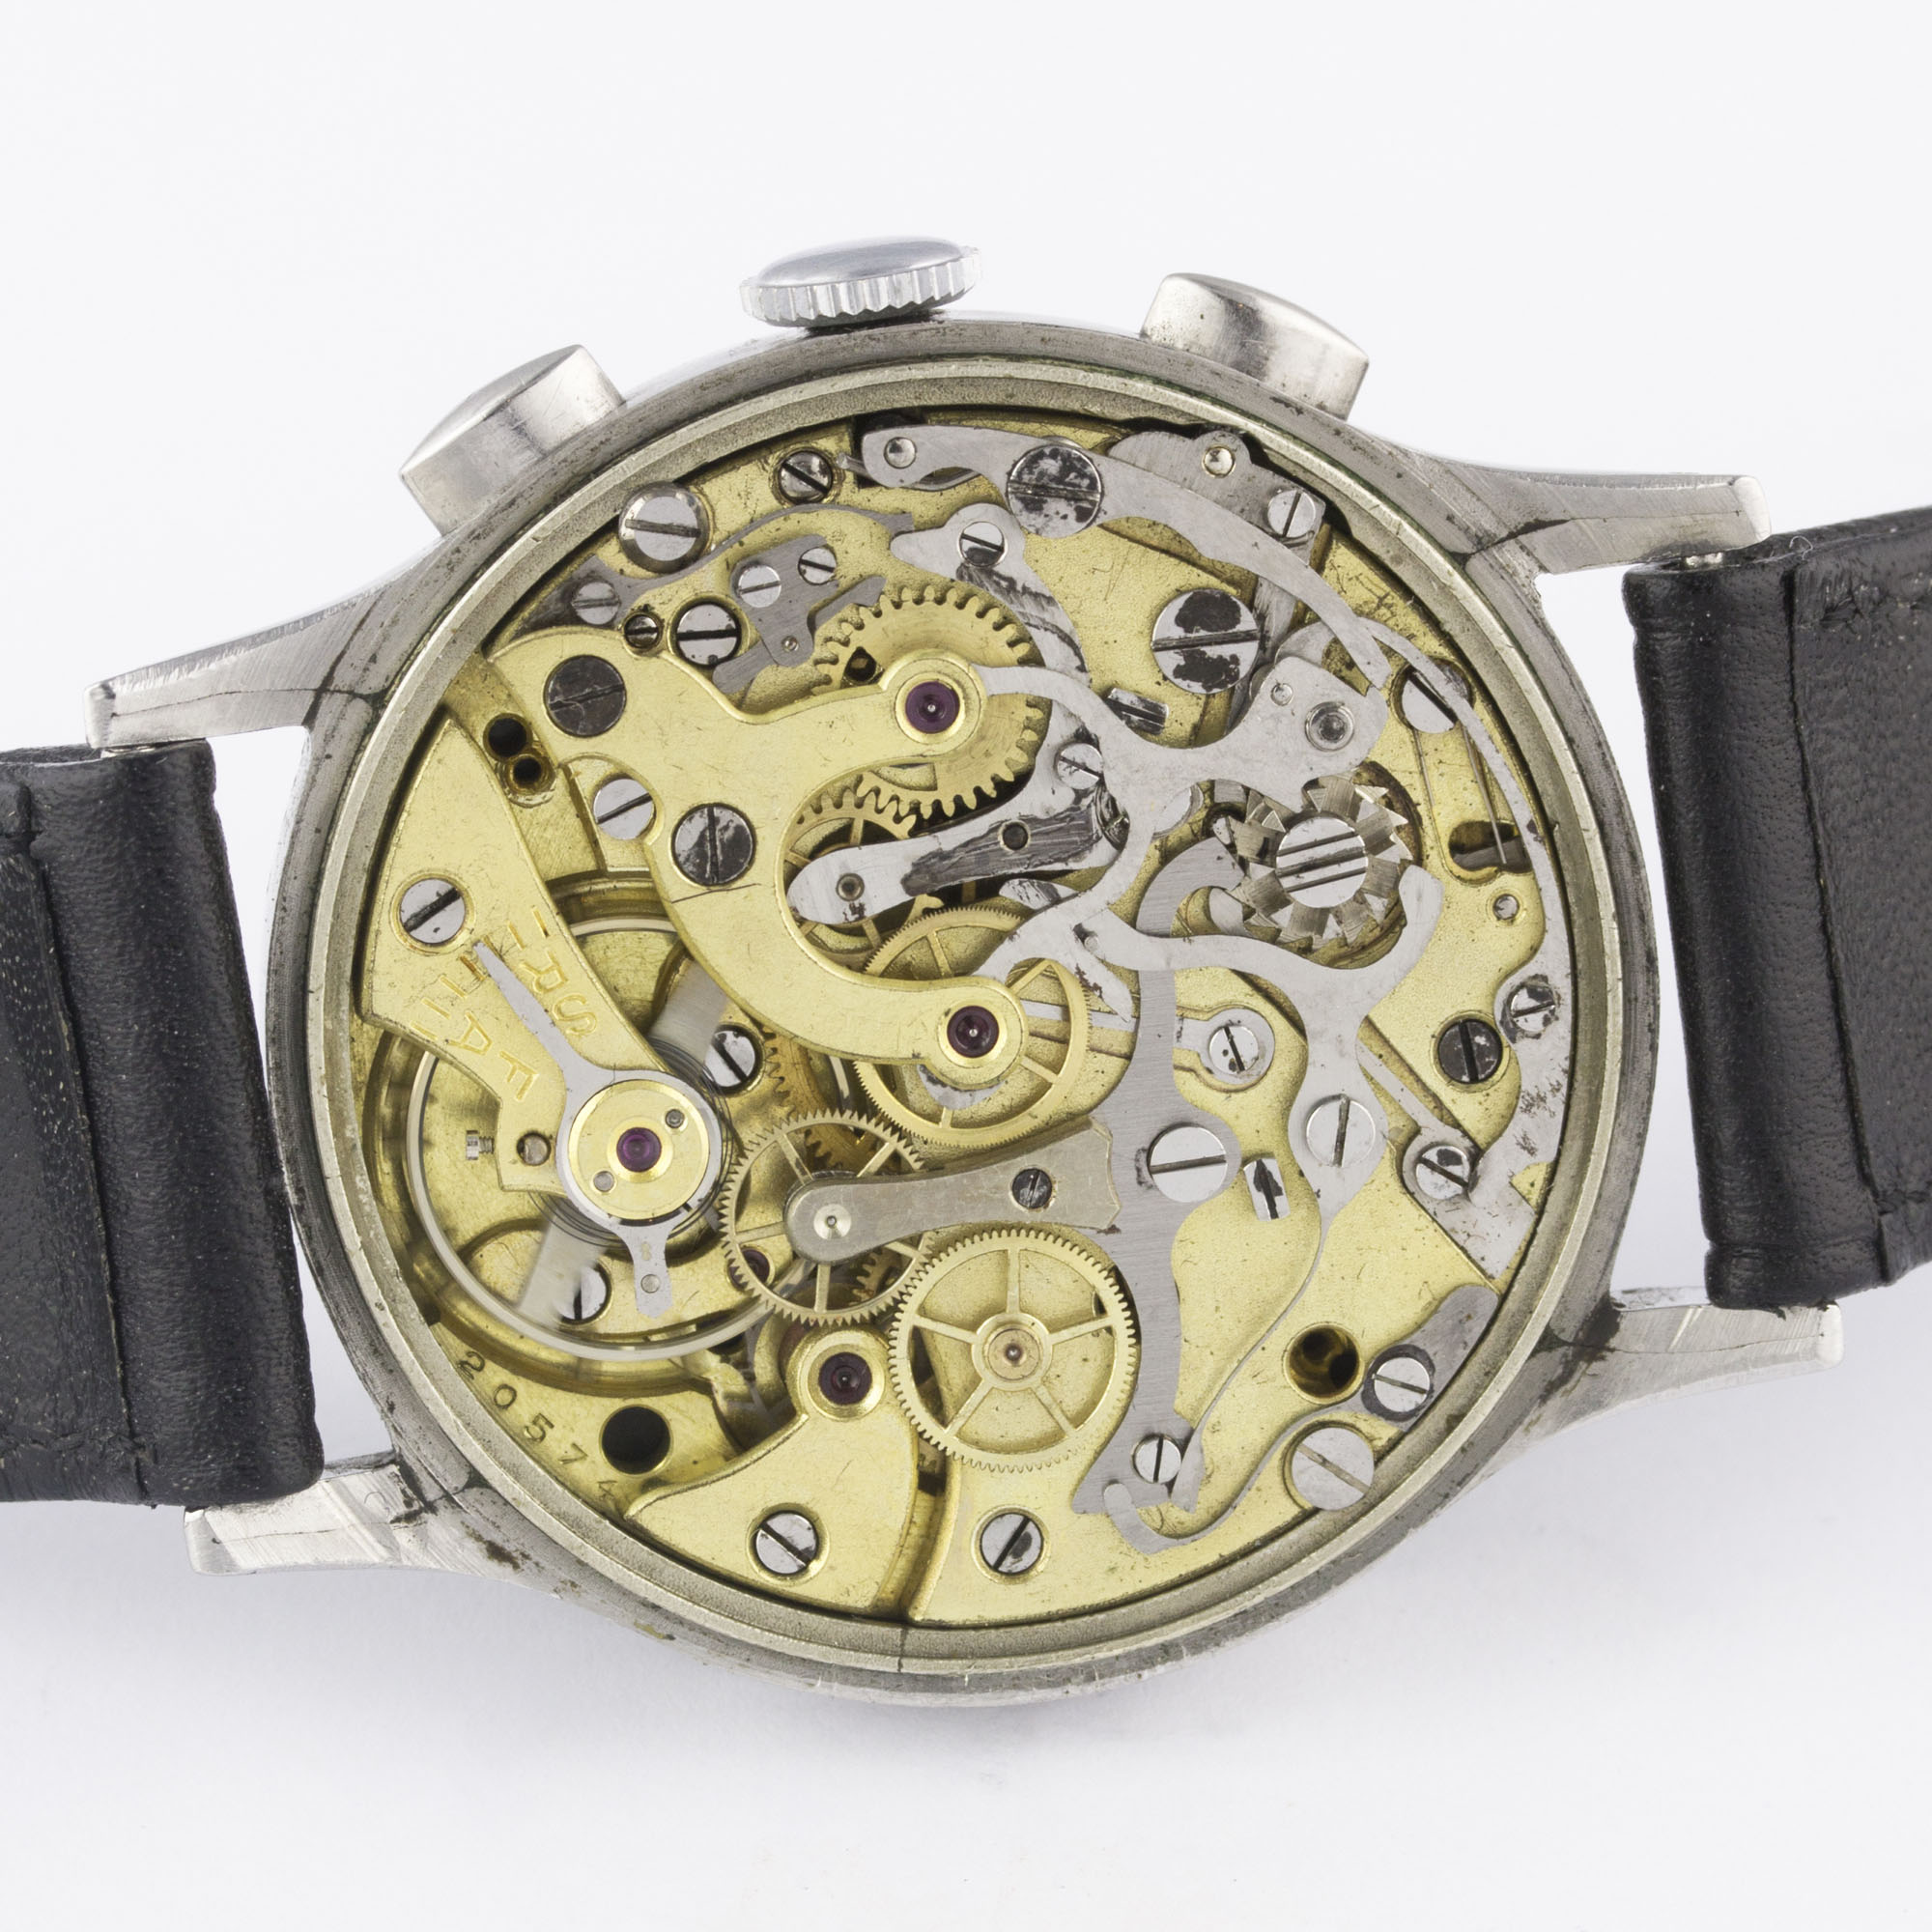 A RARE GENTLEMAN'S LARGE SIZE STAINLESS STEEL DOXA CHRONOGRAPH WRIST WATCH CIRCA 1940s, WITH GLOSS - Image 8 of 11